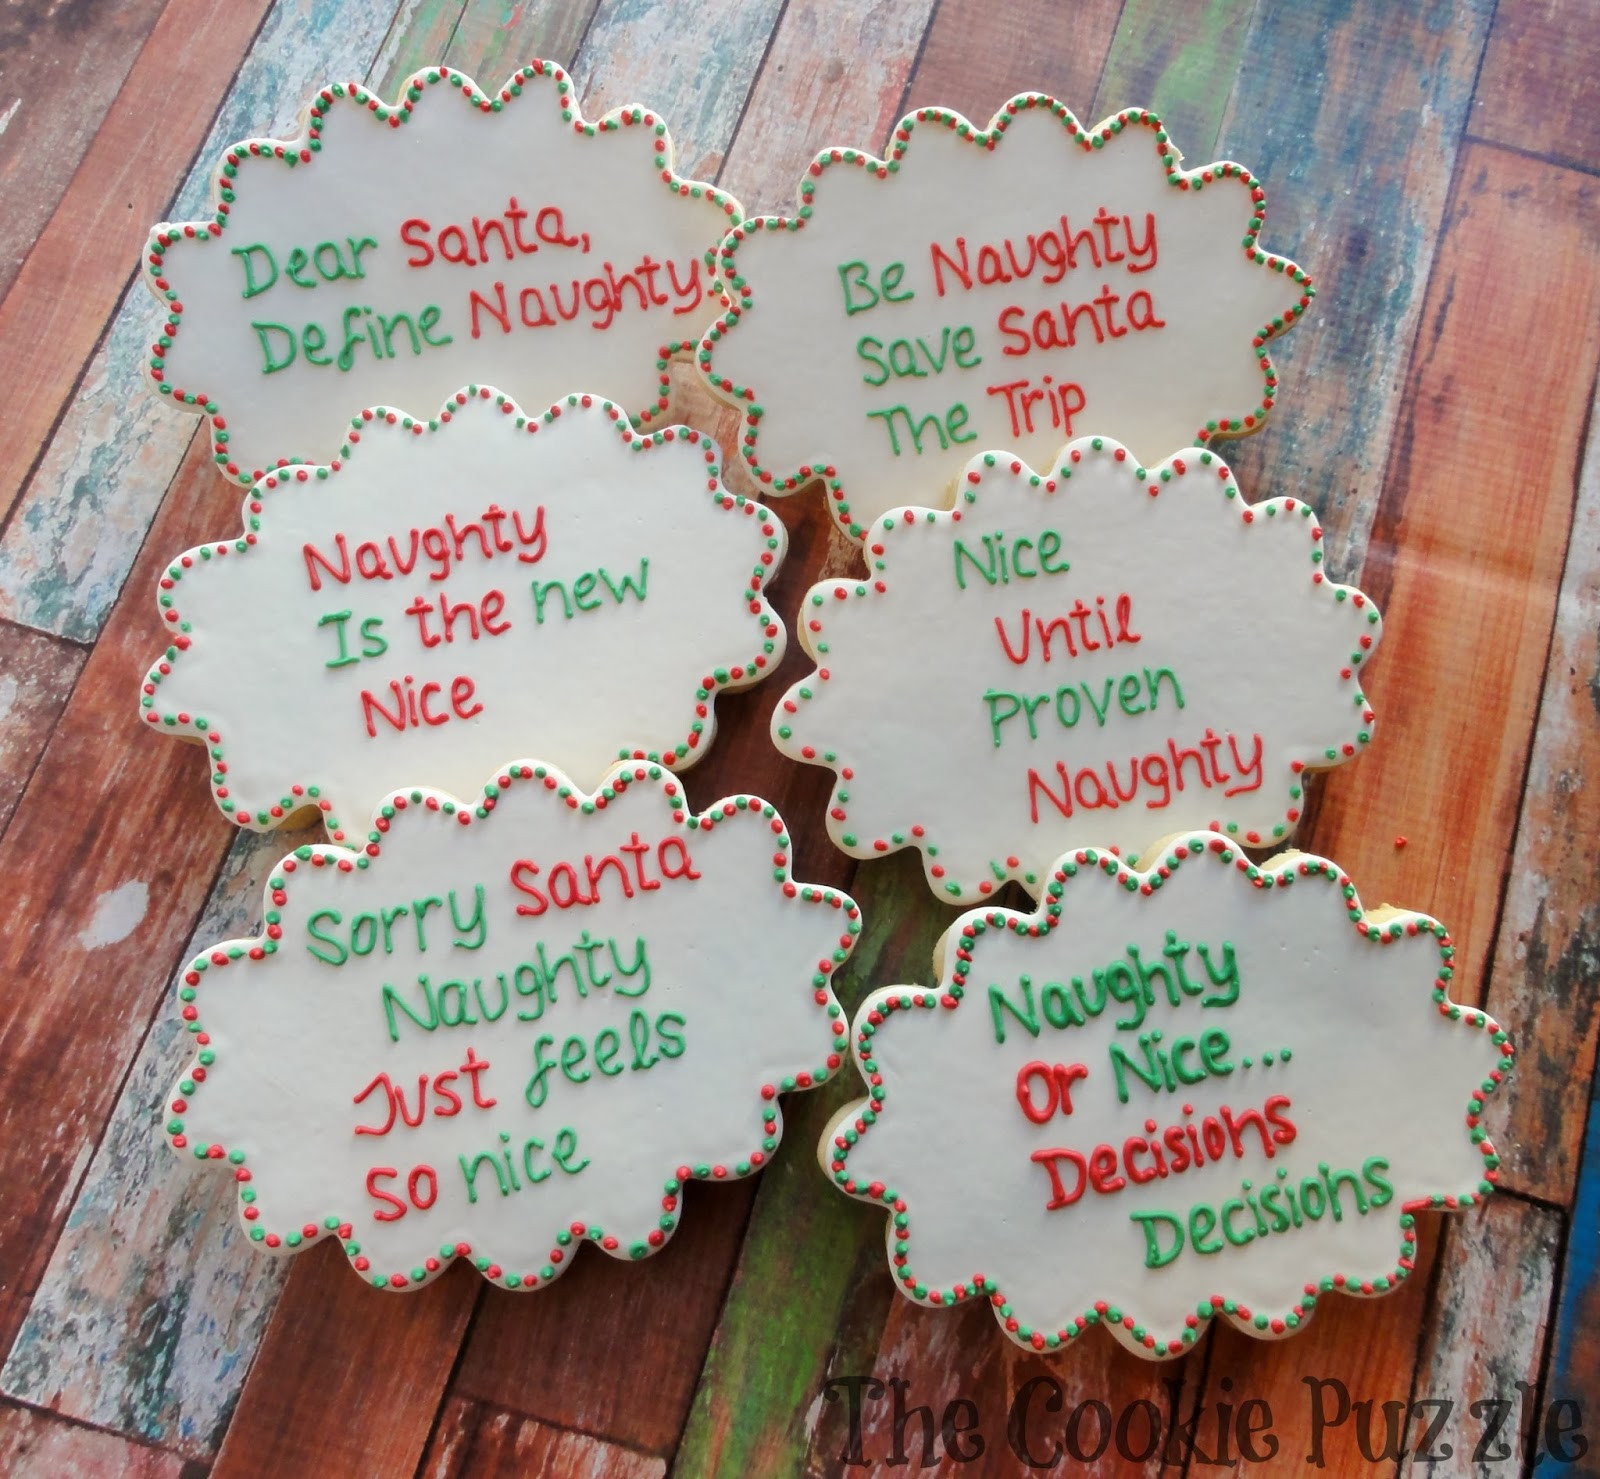 Christmas Cookie Quotes
 The Cookie Puzzle Naughty and Nice Christmas Cookies